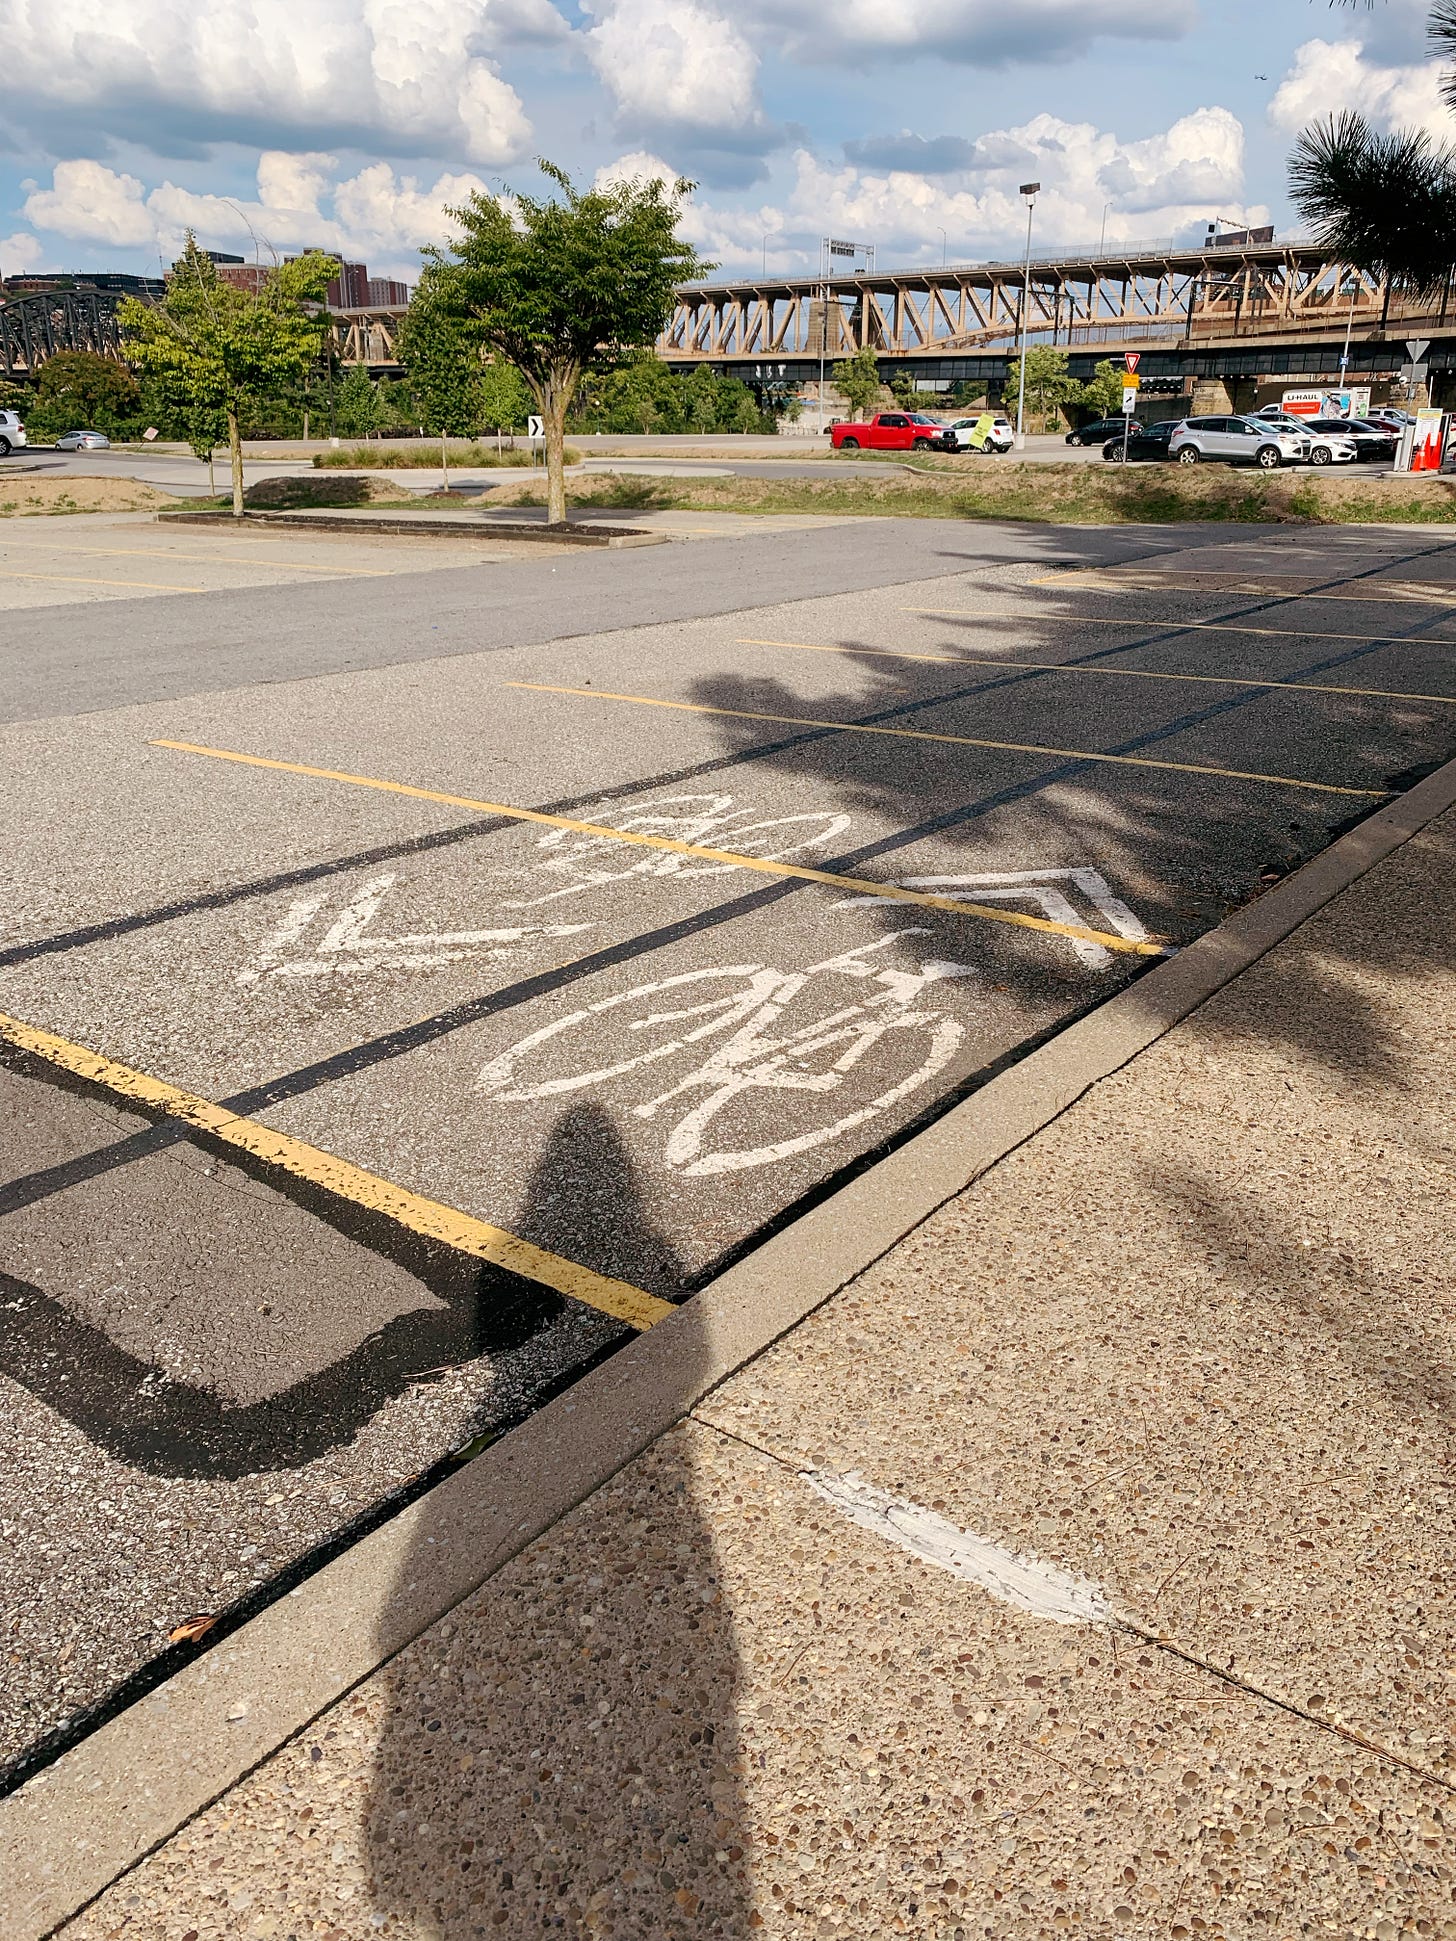 Bikelane signs painted on parking spots, somewhat confusing setup